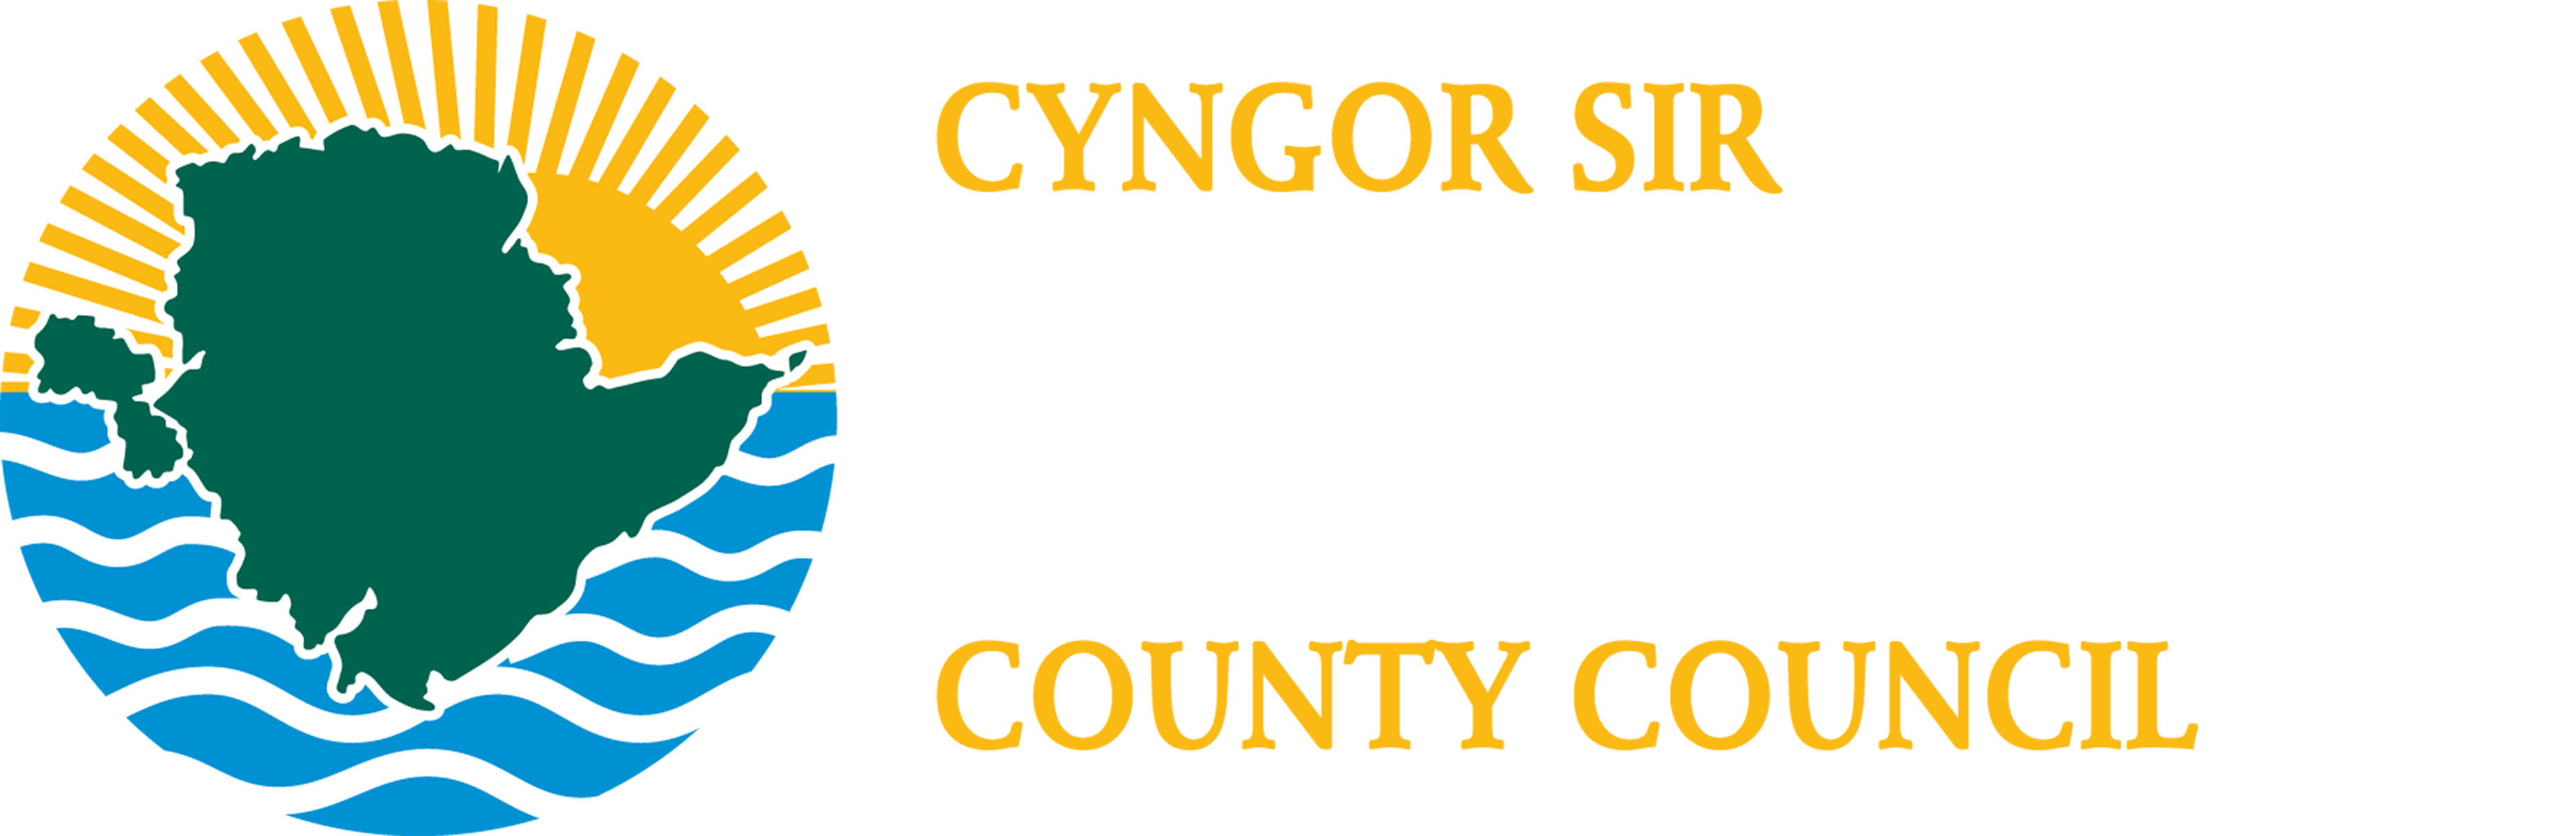 Teithio Llesol Ynys Môn / Anglesey Active Travel logo